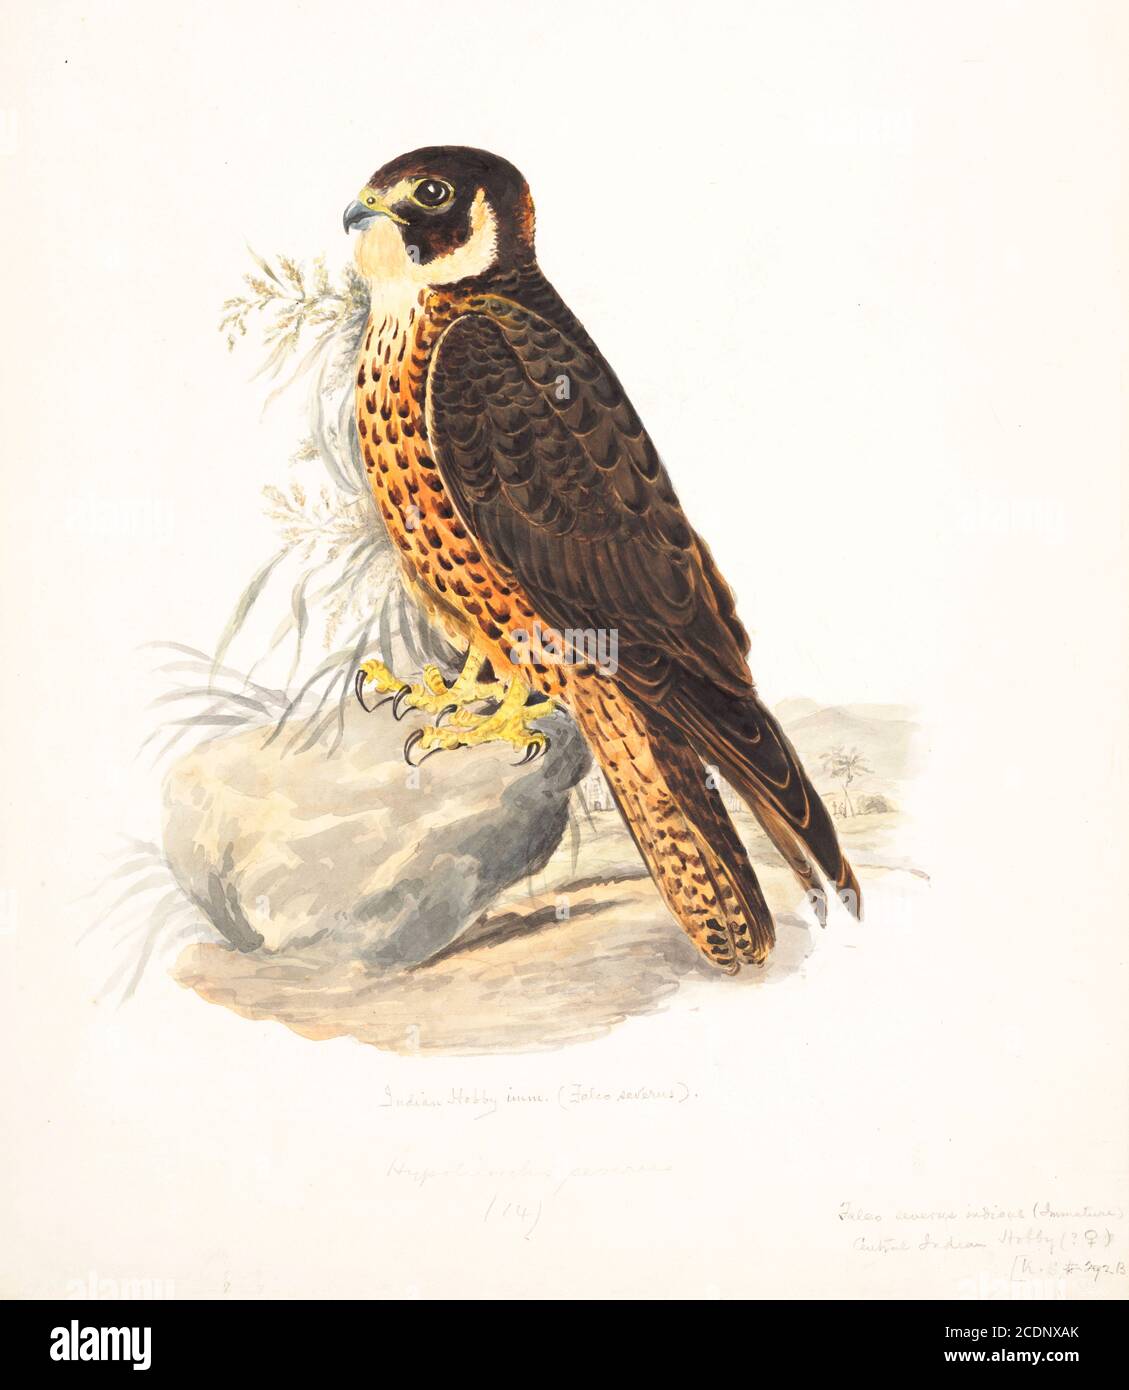 The Oriental hobby (Falco severus) is a species of falcon typically 27–30 cm long. It can be found in the northern parts of the Indian Subcontinent, across the eastern Himalayas and ranges southwards through Indochina to Australasia. 18th century watercolor painting by Elizabeth Gwillim. Lady Elizabeth Symonds Gwillim (21 April 1763 – 21 December 1807) was an artist married to Sir Henry Gwillim, Puisne Judge at the Madras high court until 1808. Lady Gwillim painted a series of about 200 watercolours of Indian birds. Produced about 20 years before John James Audubon, her work has been acclaimed Stock Photo